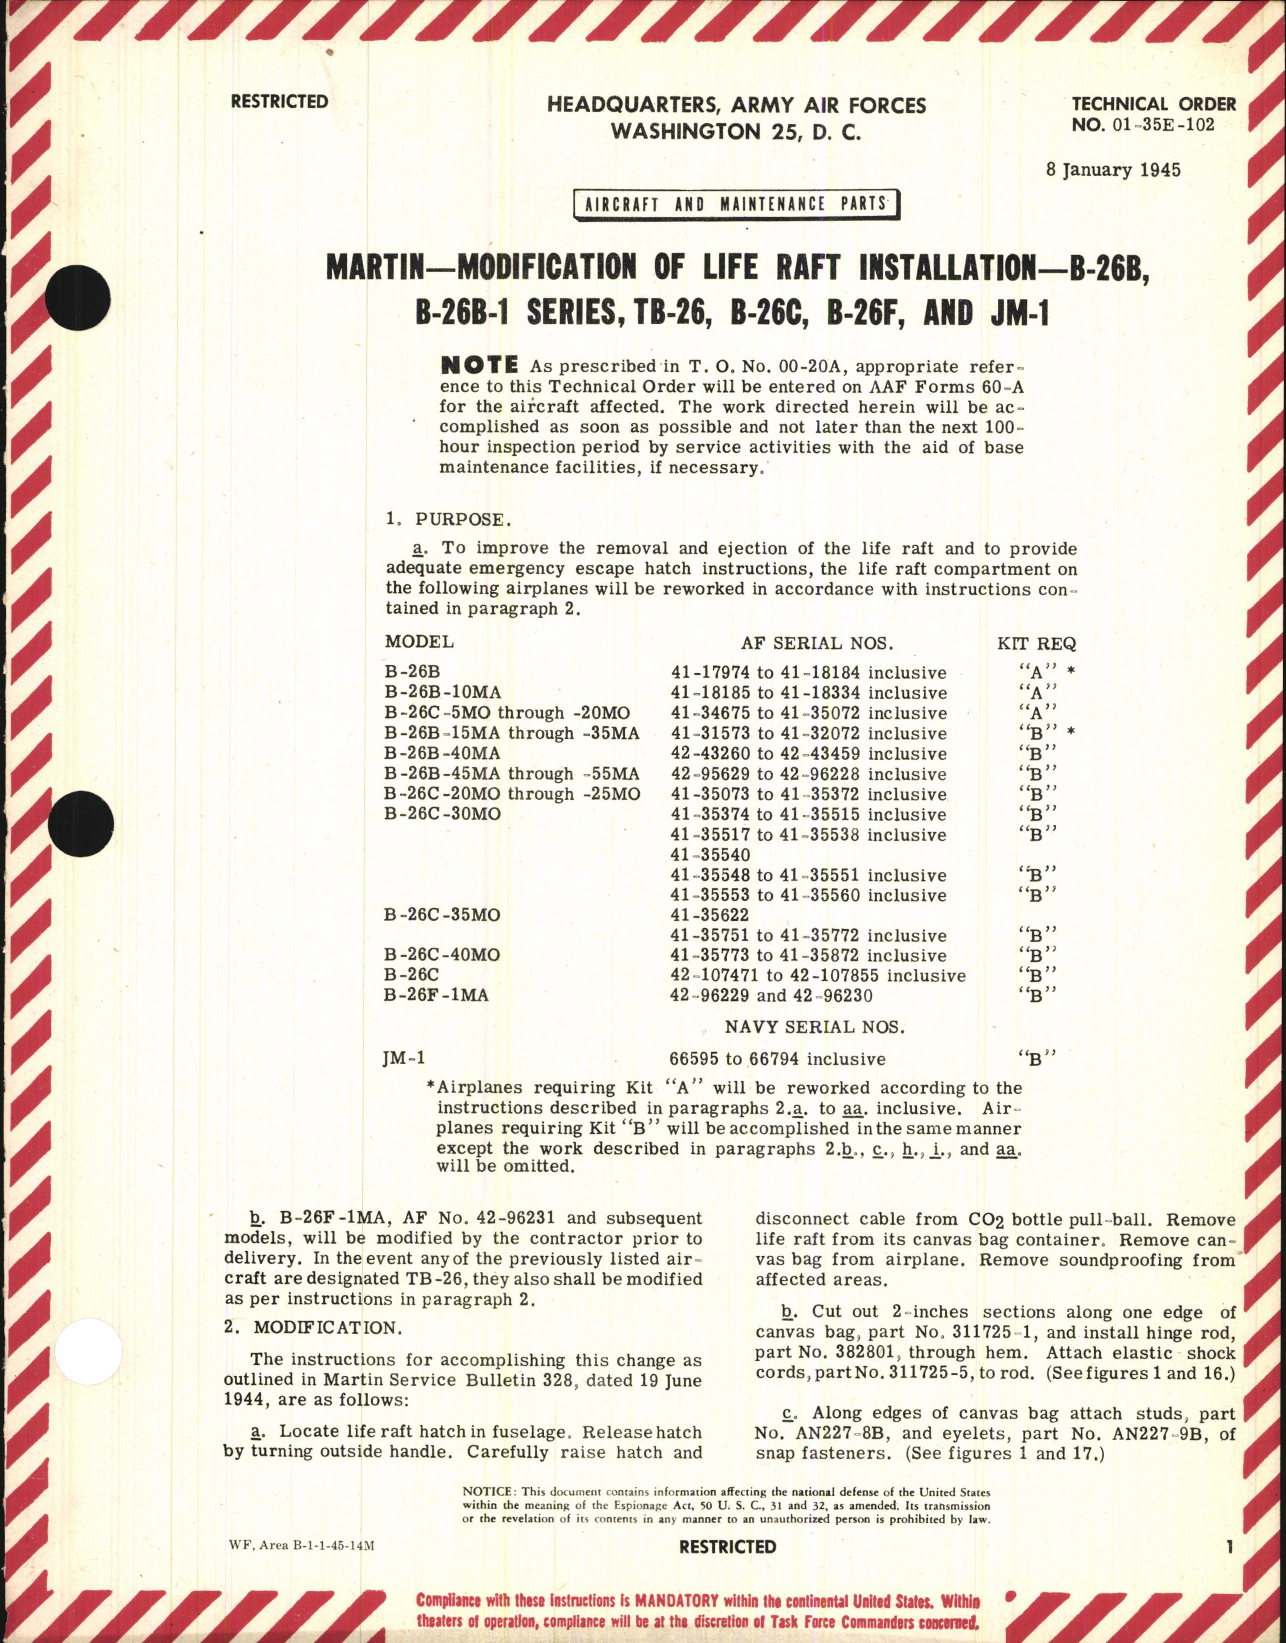 Sample page 1 from AirCorps Library document: Modification of Life Raft Installation for B-26B. B-26B-1, TB-26, B-26C, B-26F, and JM-1